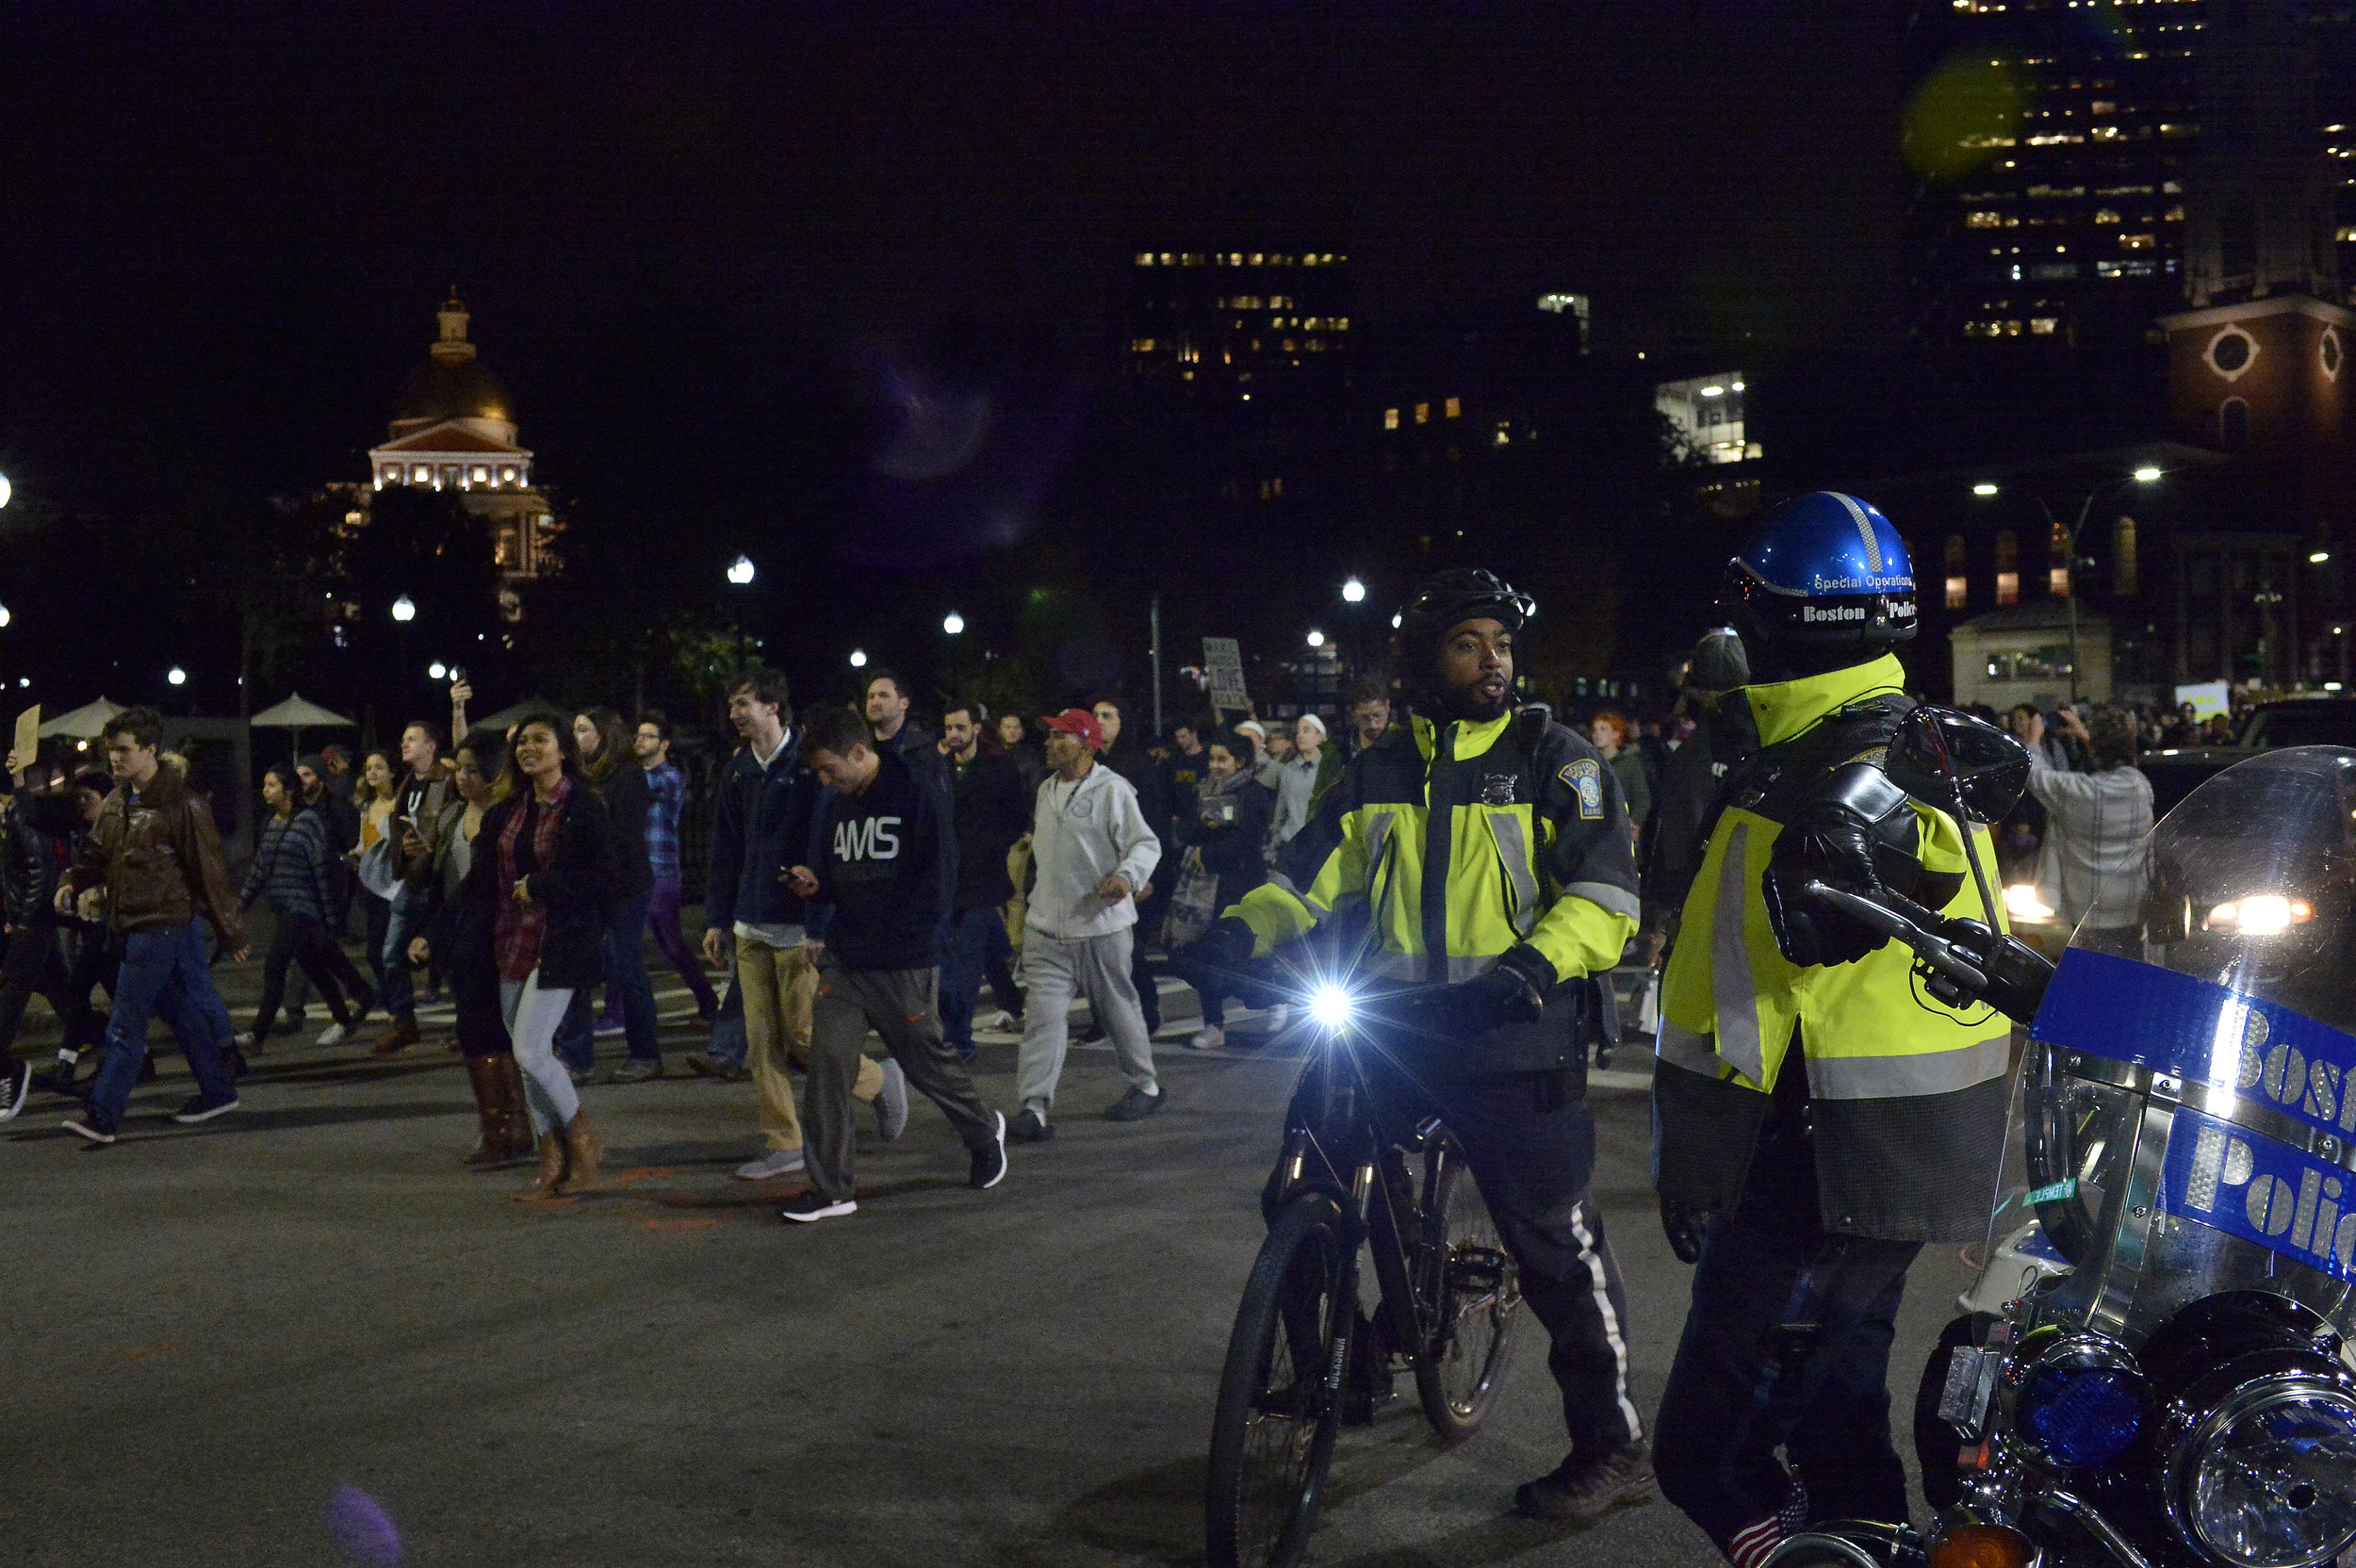  BOSTON, MA November 9, 2016: Boston Police estimate more than 6,000 protestors took part in a rally on Boston Common to protest the election of Republican president-elect Donald J. Trump on Tuesday, November 9, 2016. CR: Paul Marotta, SIPAUSA 